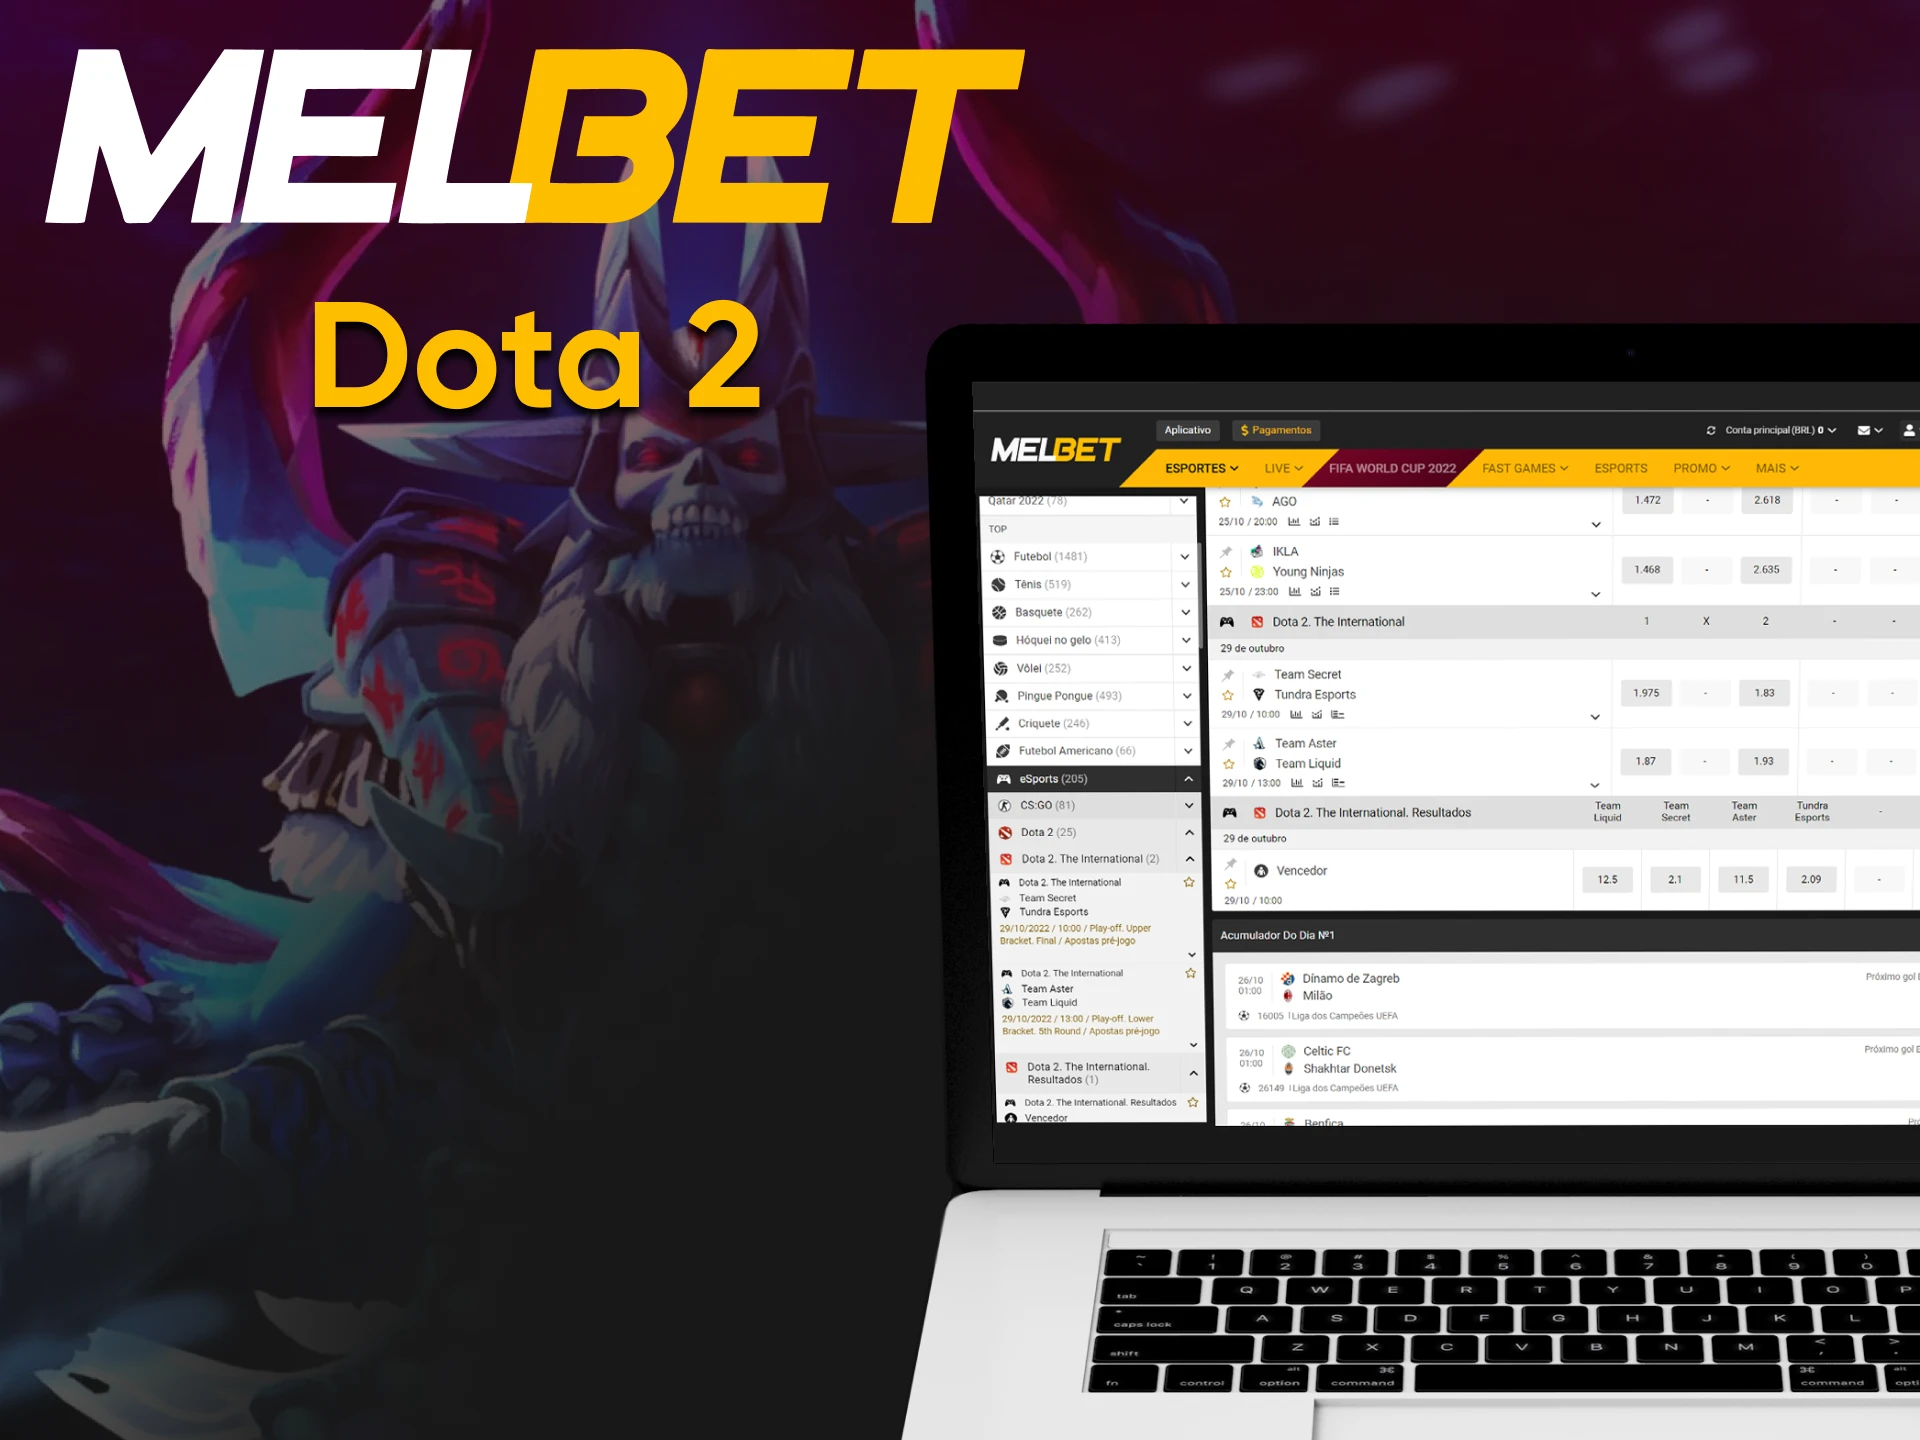 On the Melbet website, you can play Dota 2.